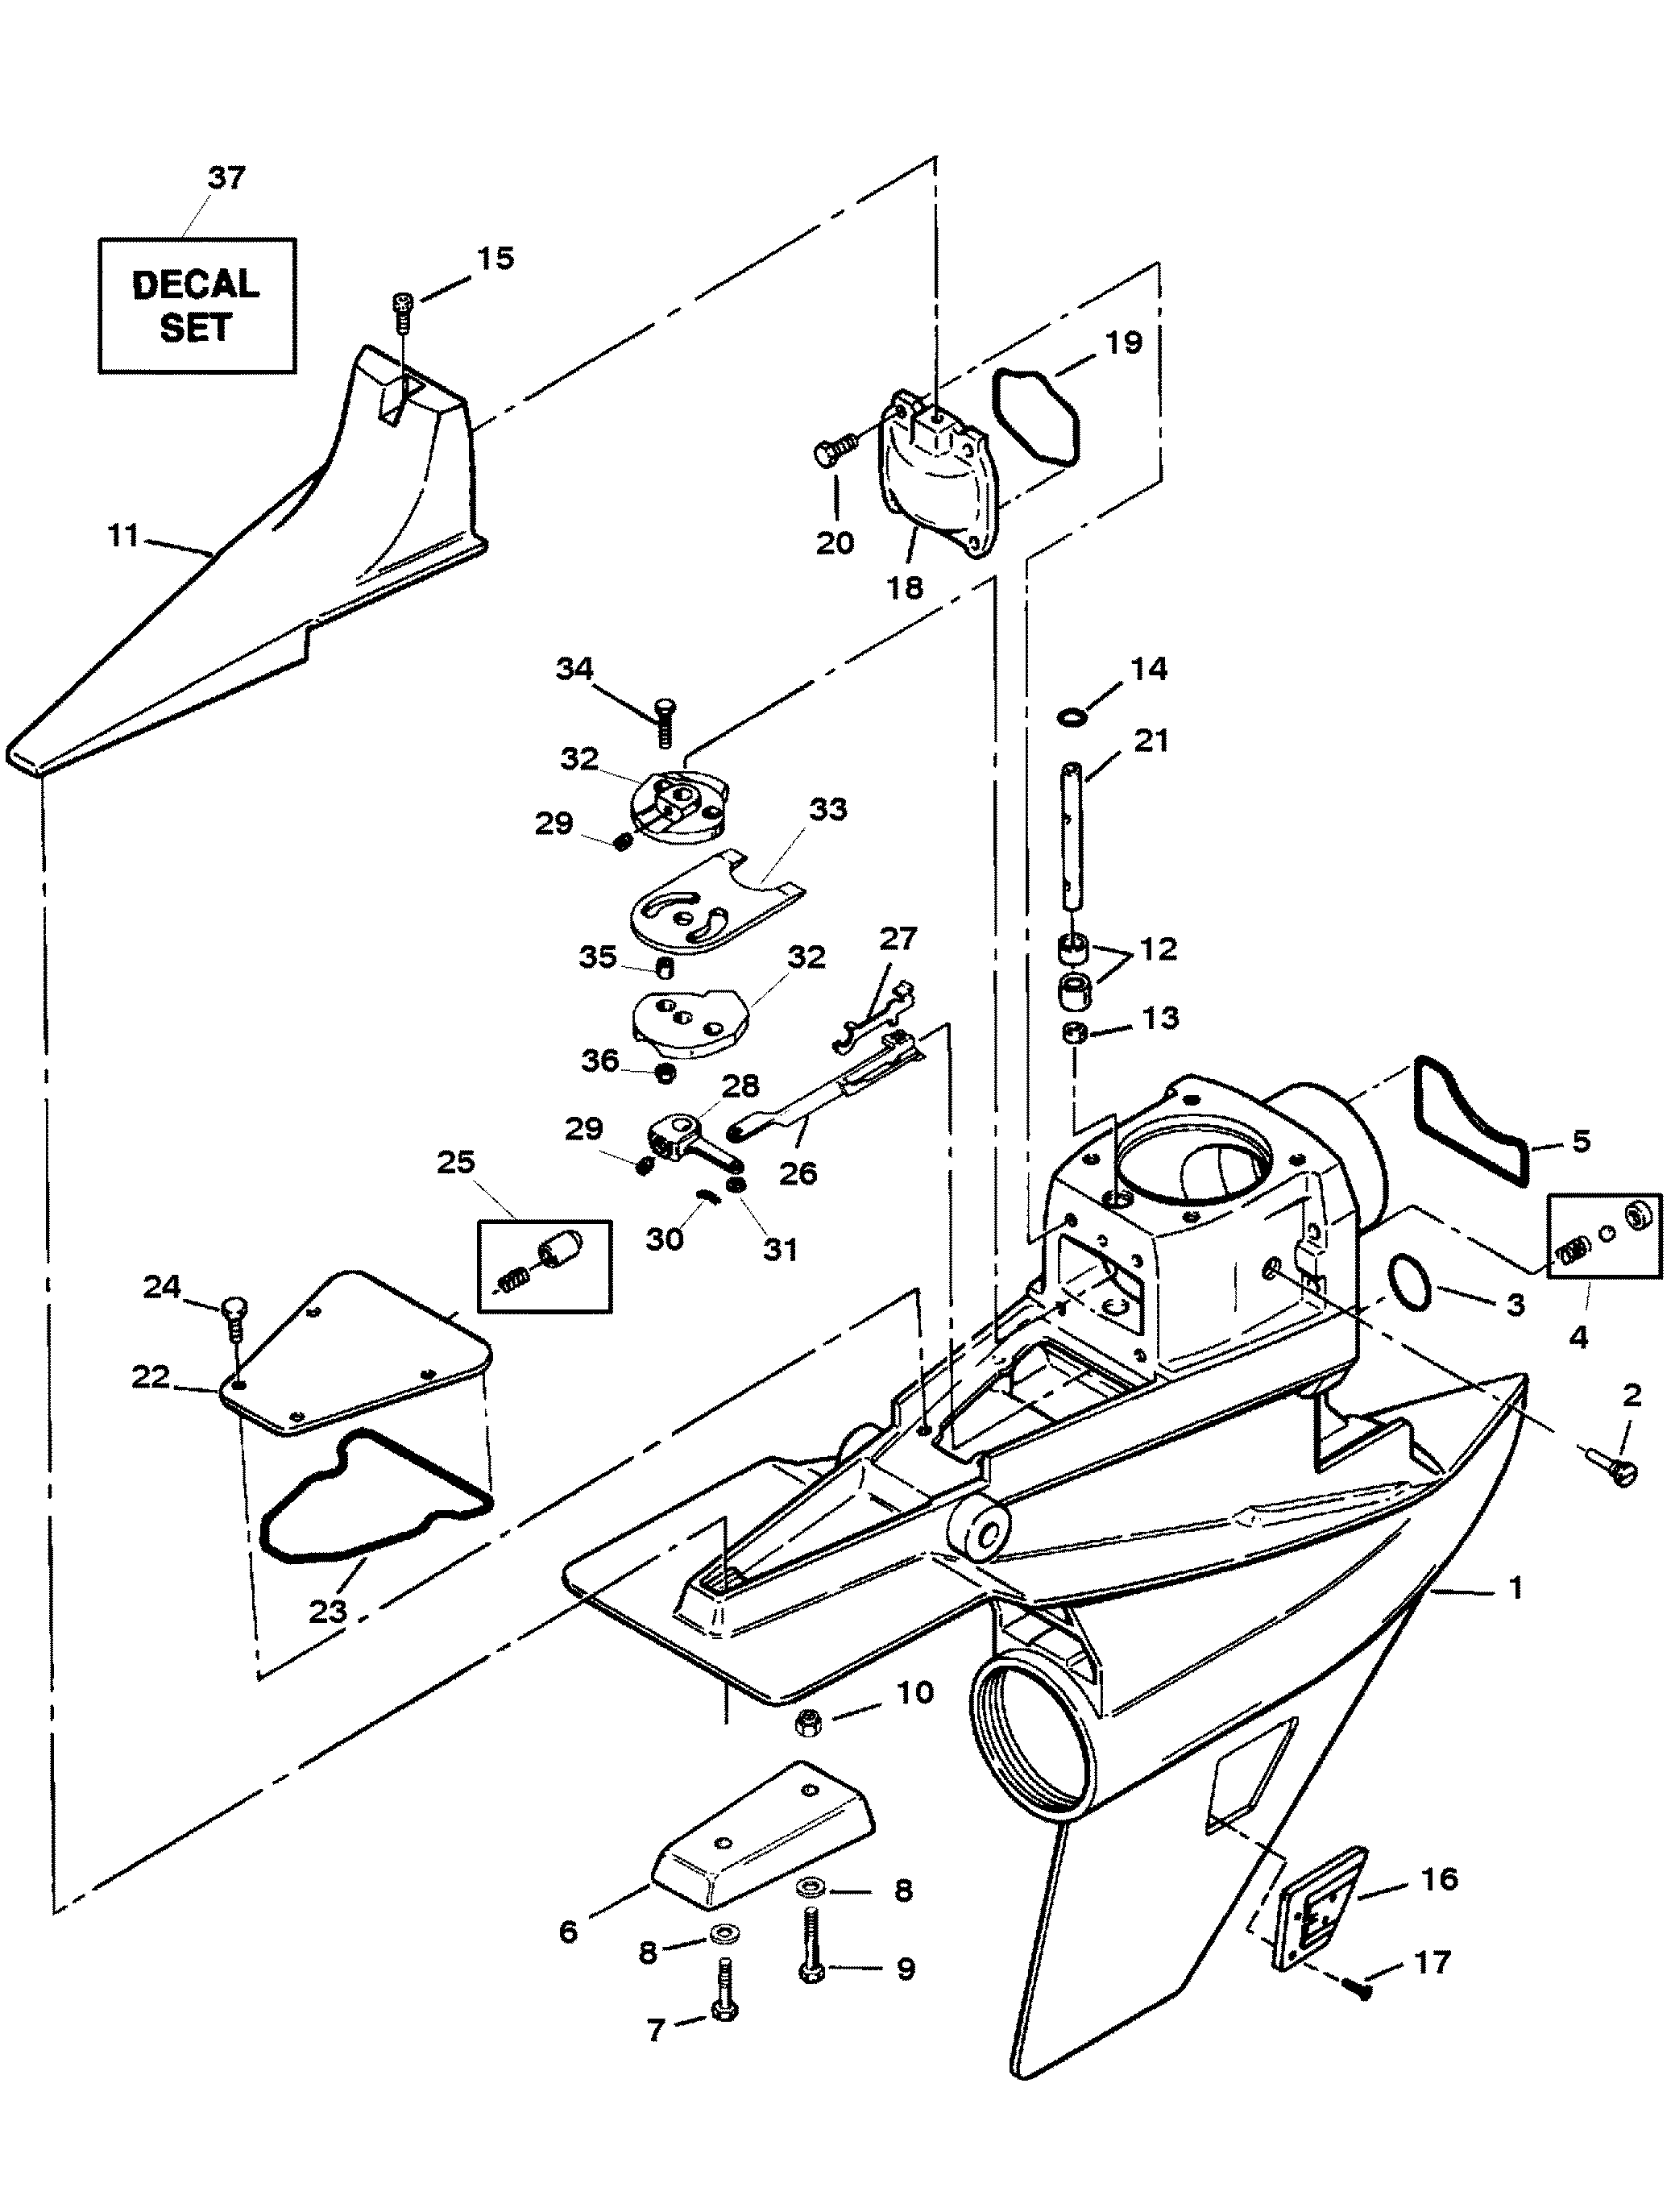 DRIVE HOUSING AND COMPONENTS